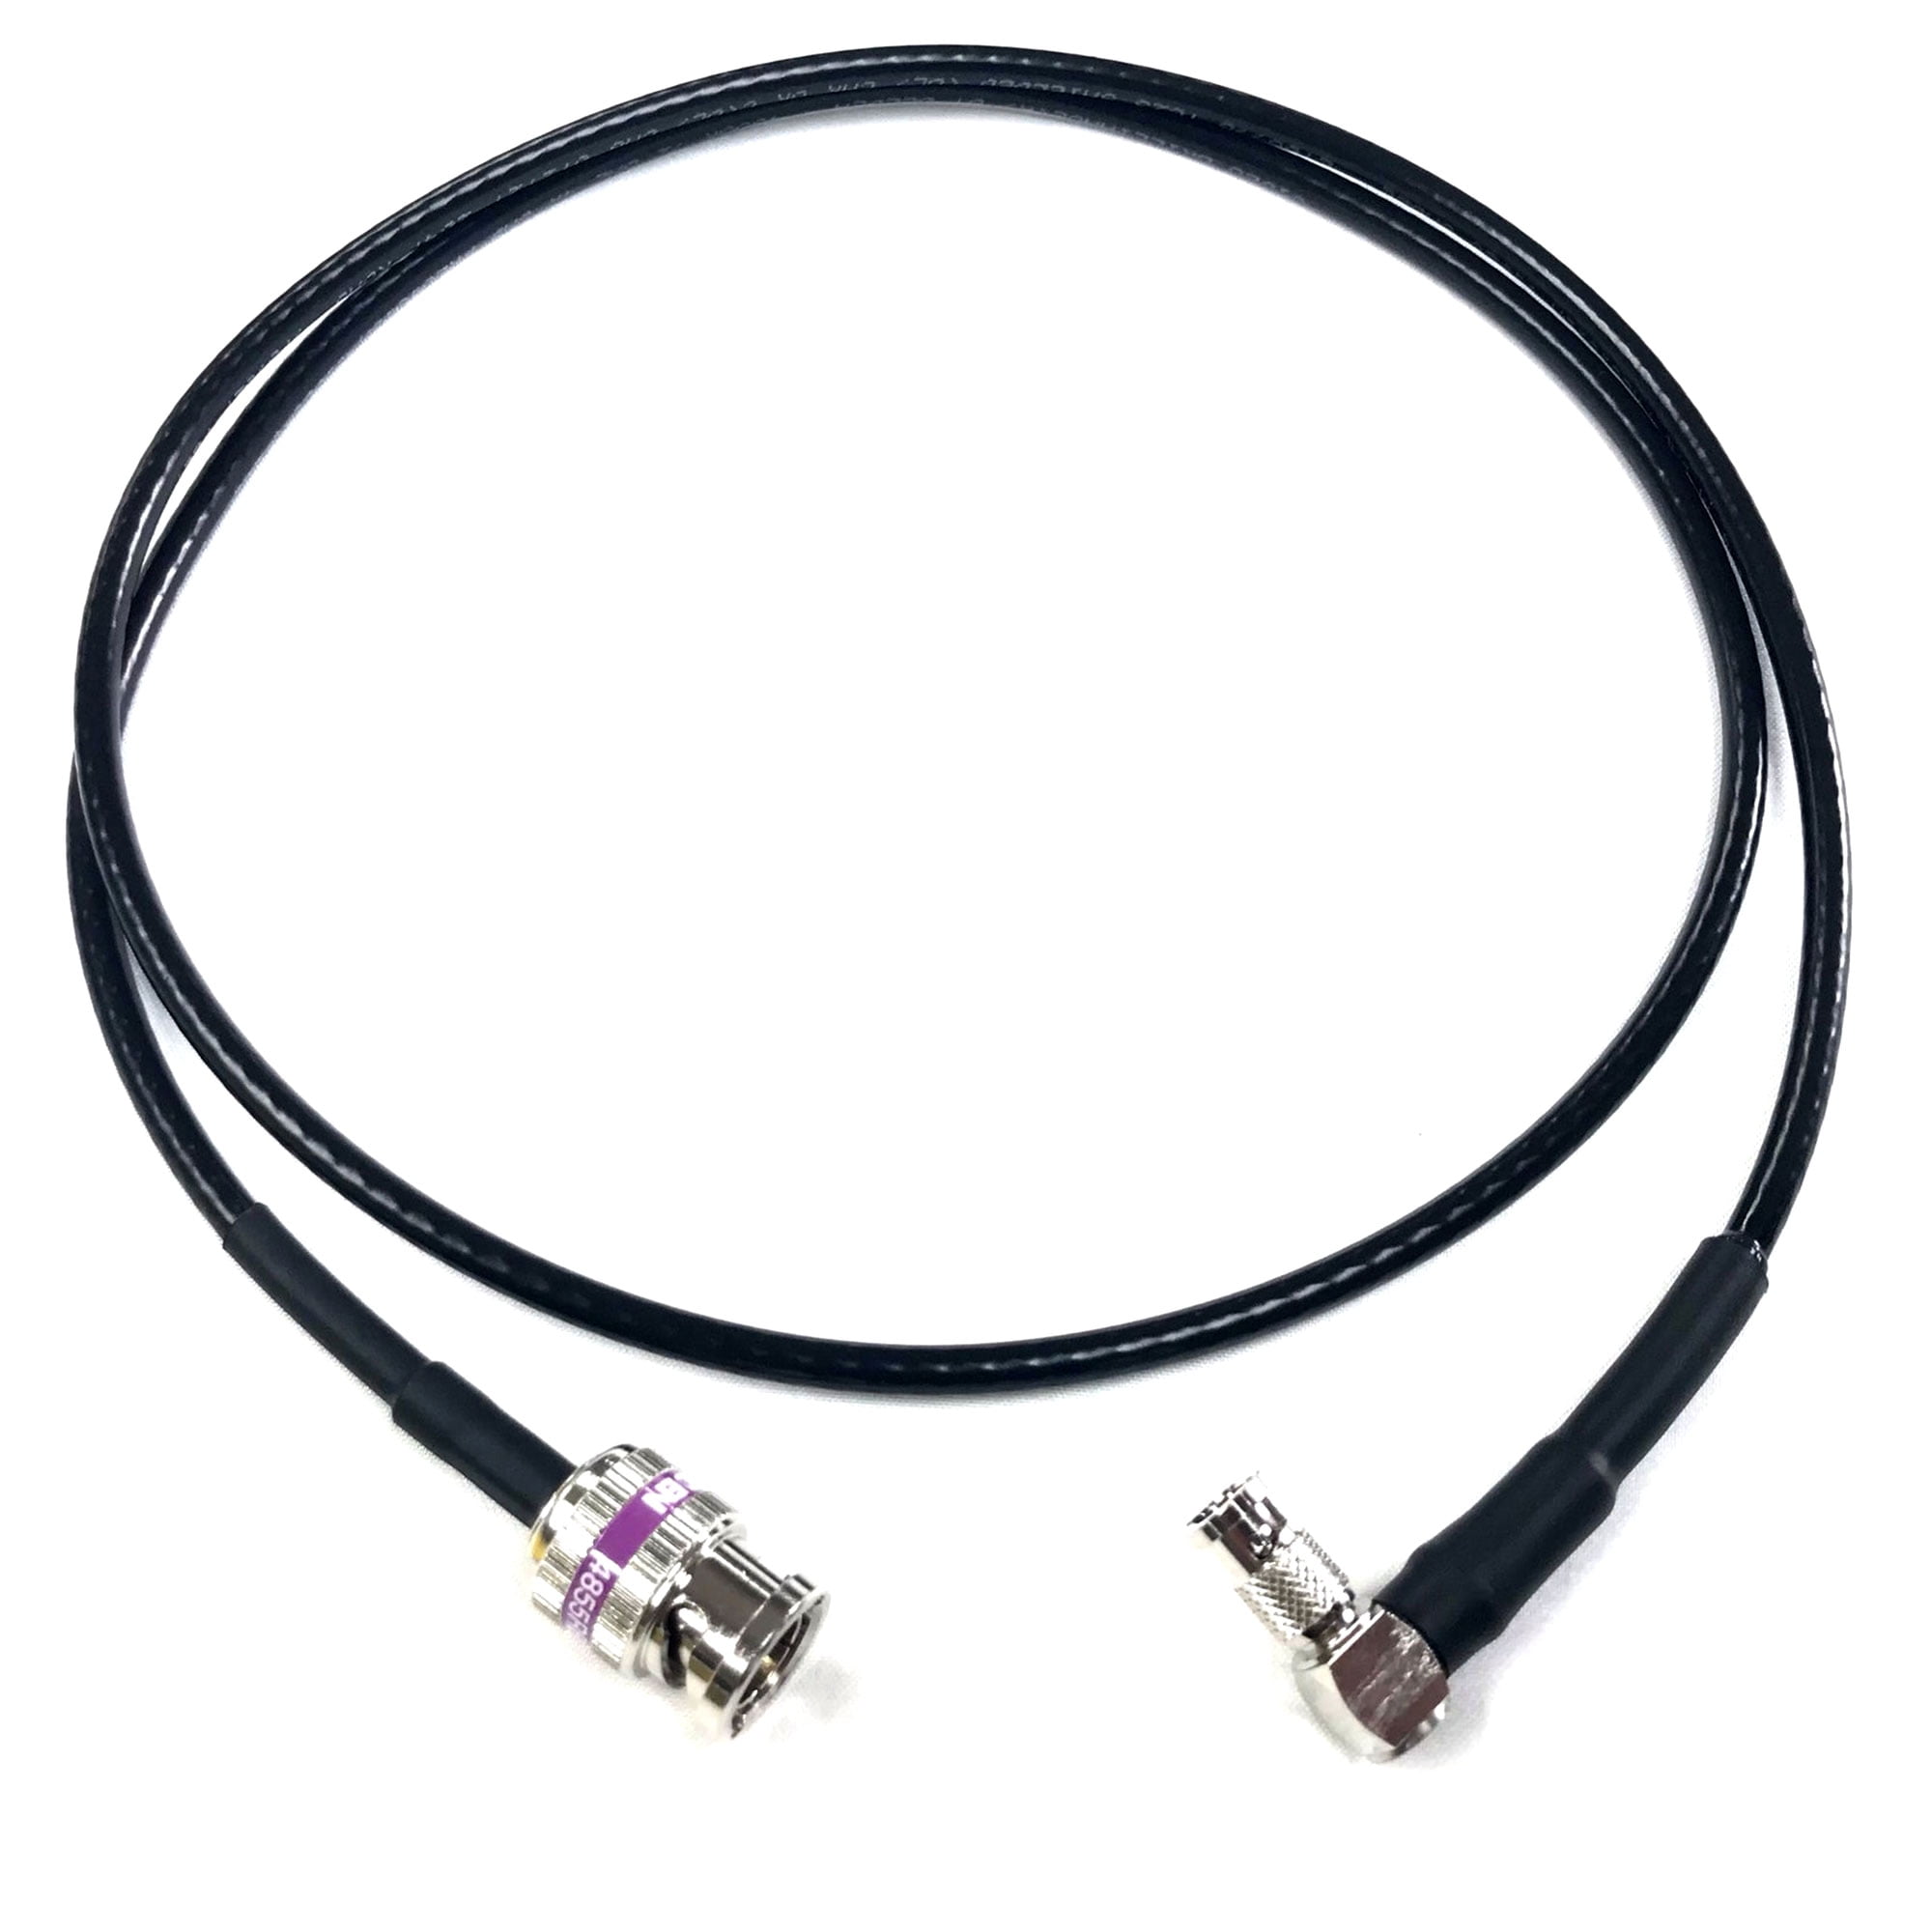 Vanco 3.5mm Female to 2.5mm Male Stereo Jack Adapter - Micro Center